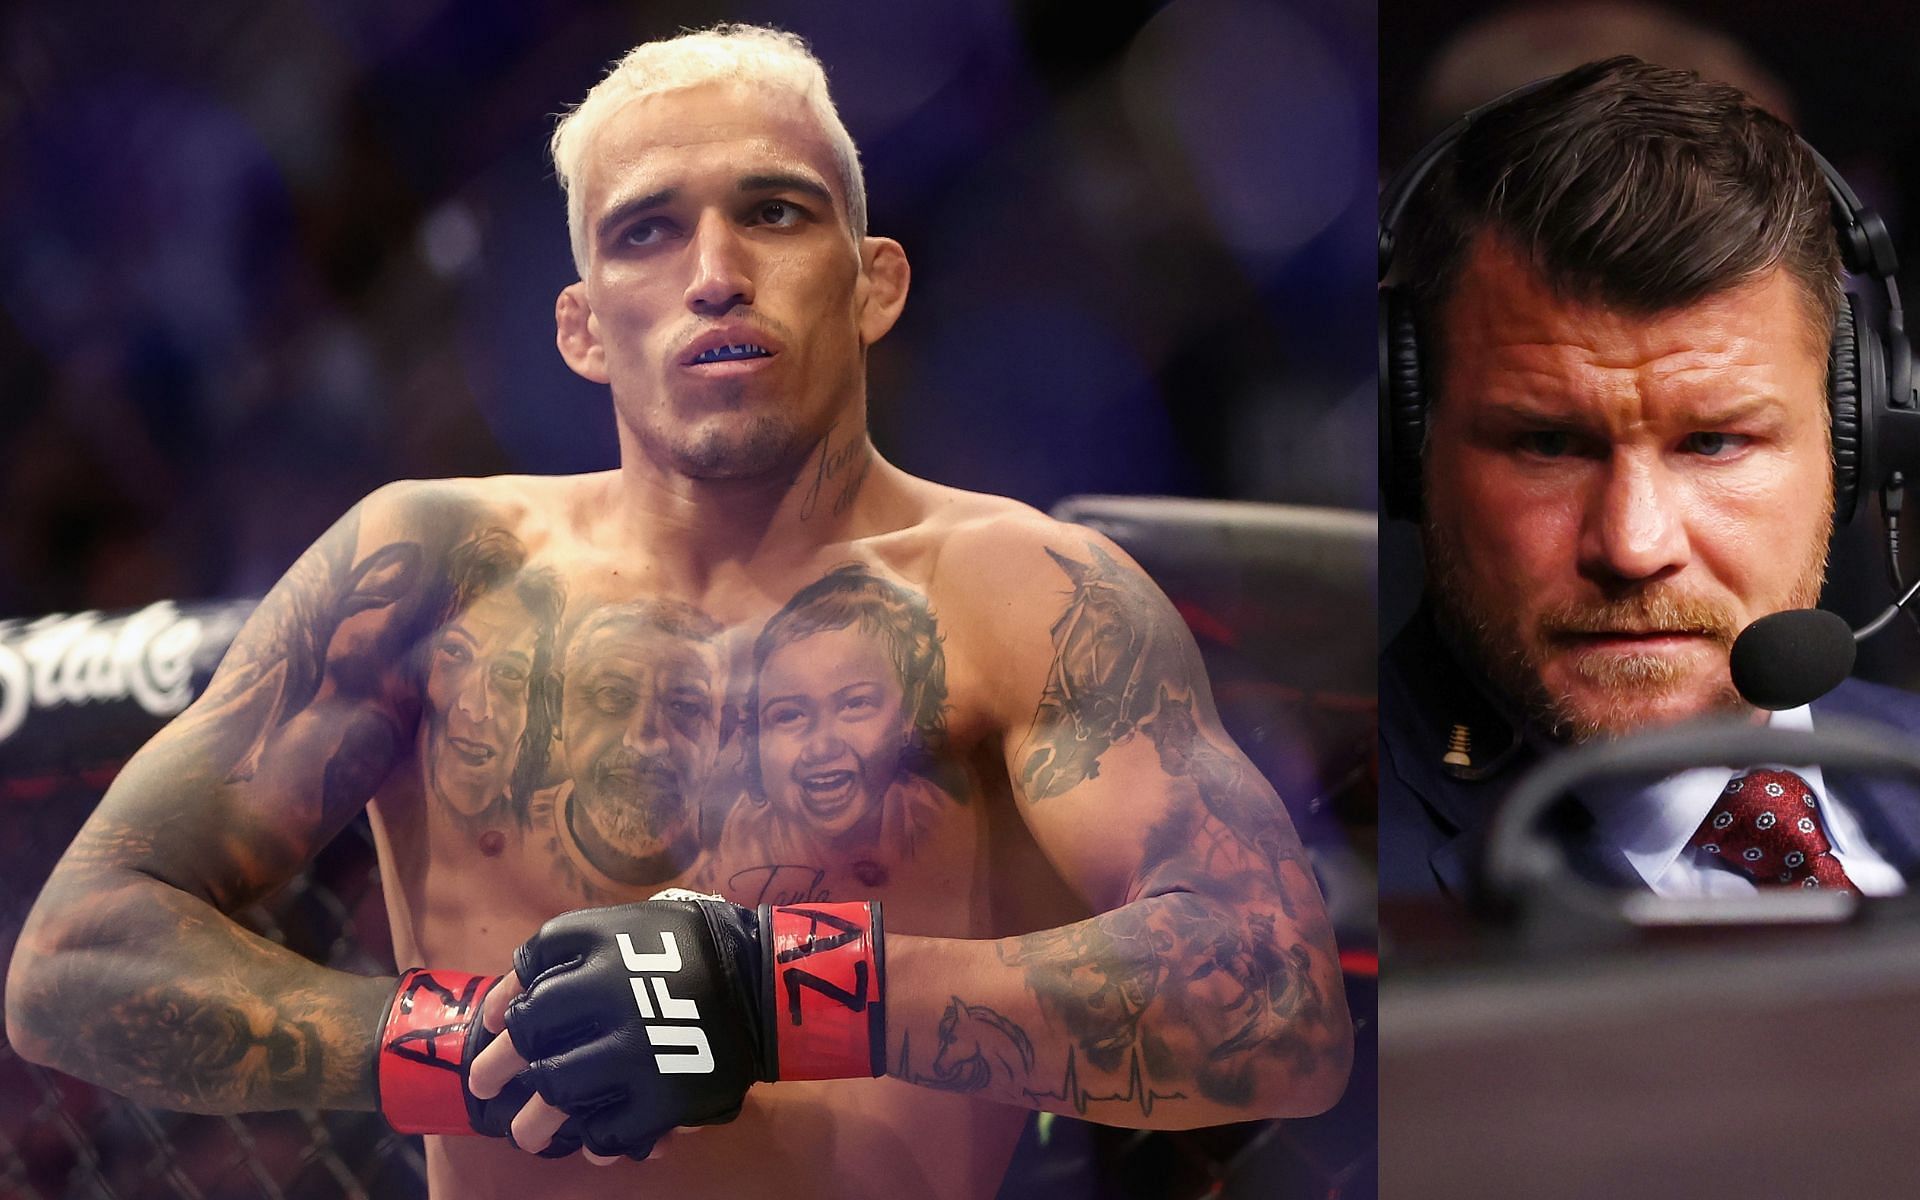 Charles Oliveira (left) and Michael Bisping (right). [Images courtesy: Getty Images]